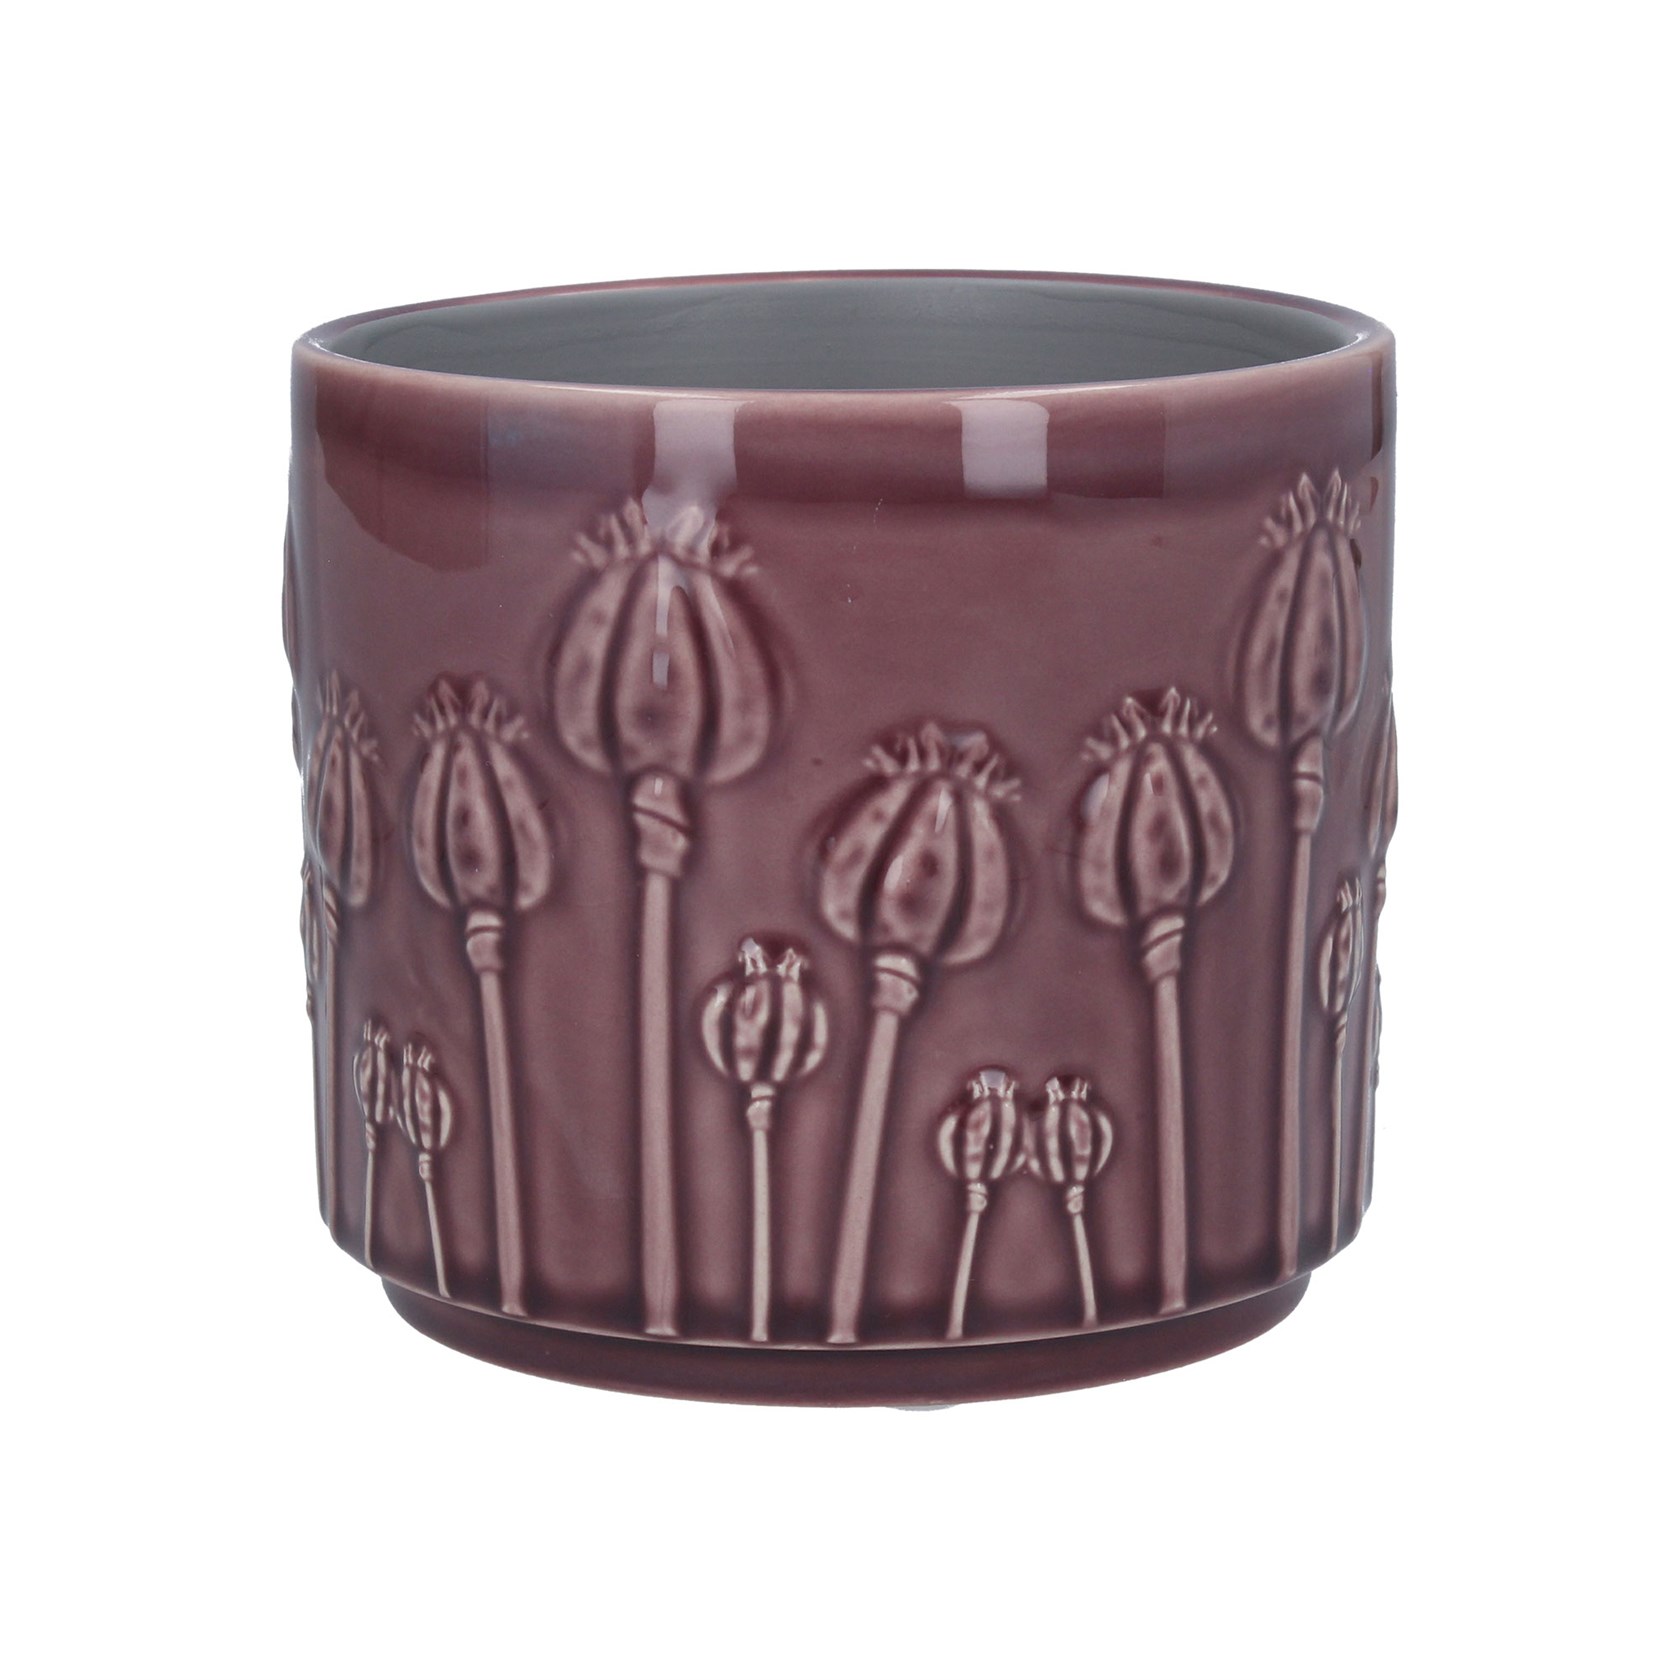 A medium purple coloured ceramic pot cover with all over poppy design. The perfect addition to your home or the perfect gift for yourself or a loved one. By London designer Gisela Graham.